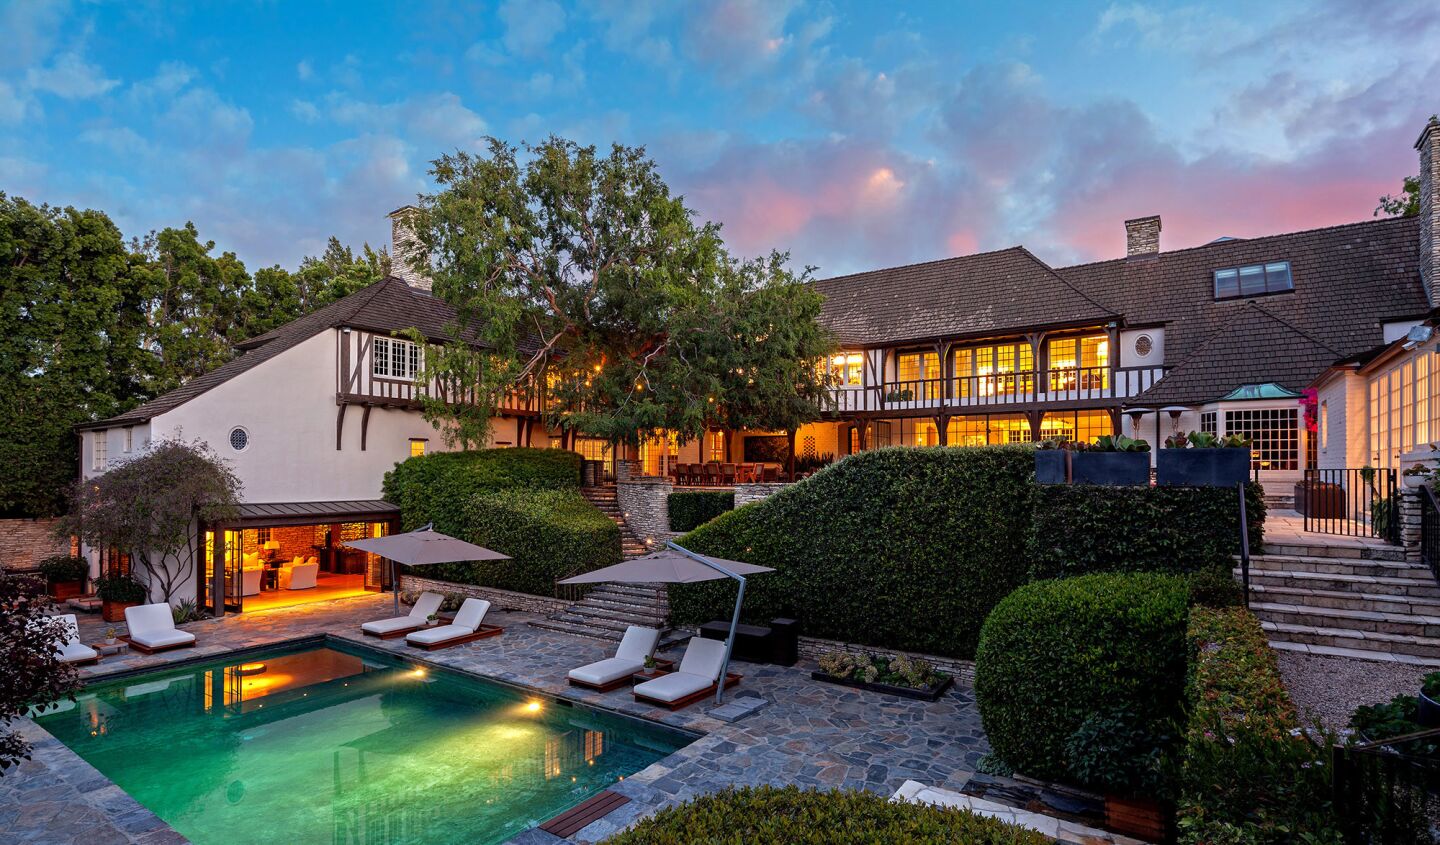 The Tudor-style home in Beverly Hills, listed at $56 million, was built in 1934 for actors Fredric March and Florence Eldridge.